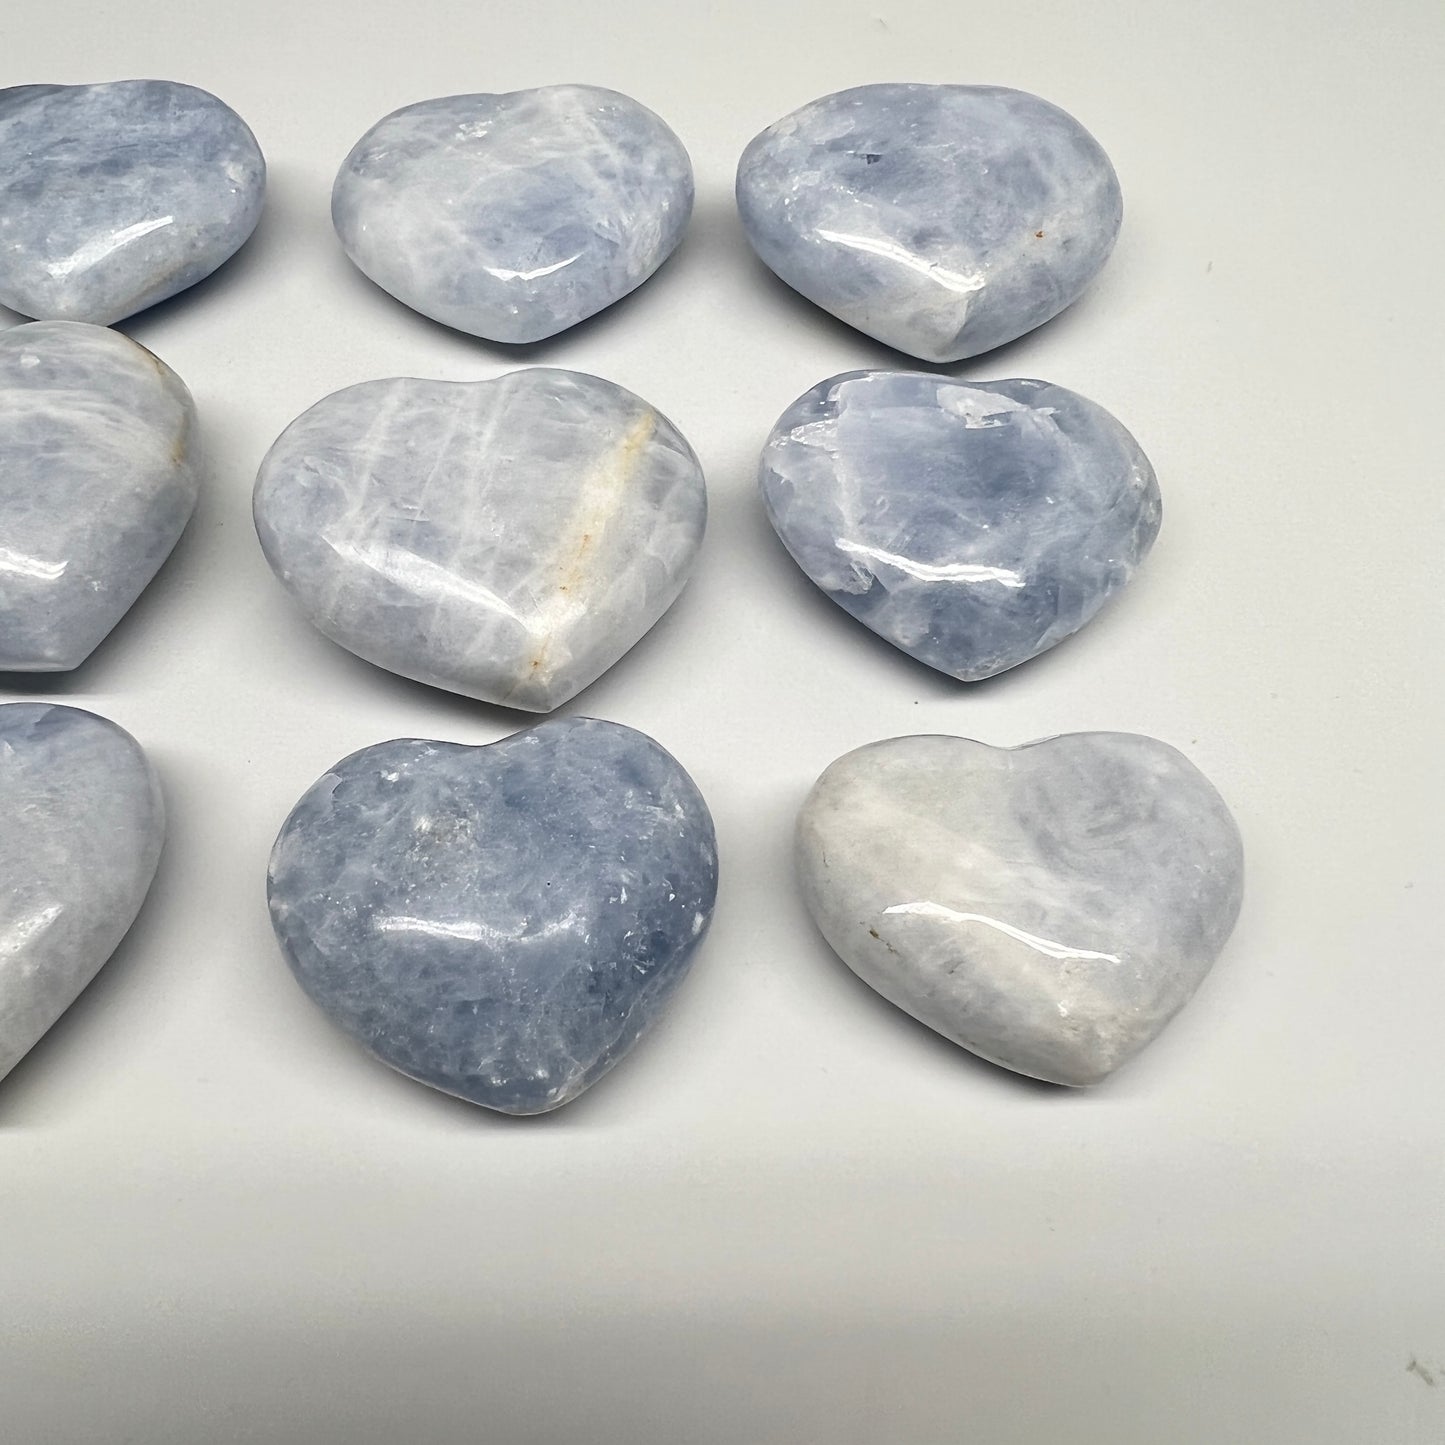 1040g (2.2 lbs) , 9 pcs, 1.7"- 2.3", Blue Calcite Hearts from Madagascar, B20854